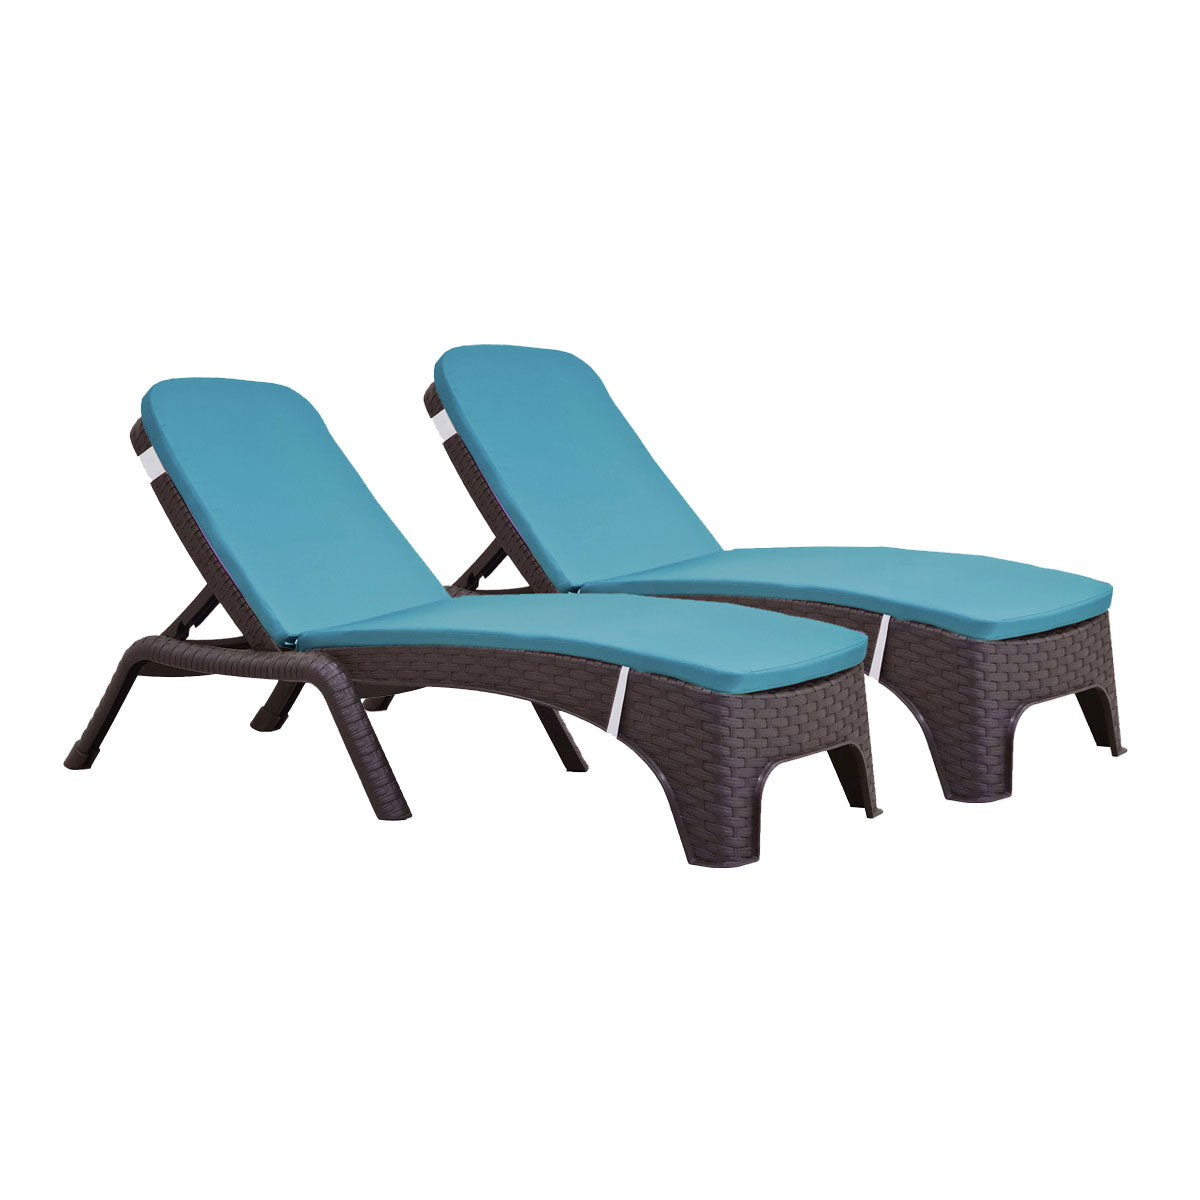 Rainbow Outdoor Roma Set of 2 Chaise Lounger-Brown With Cushion